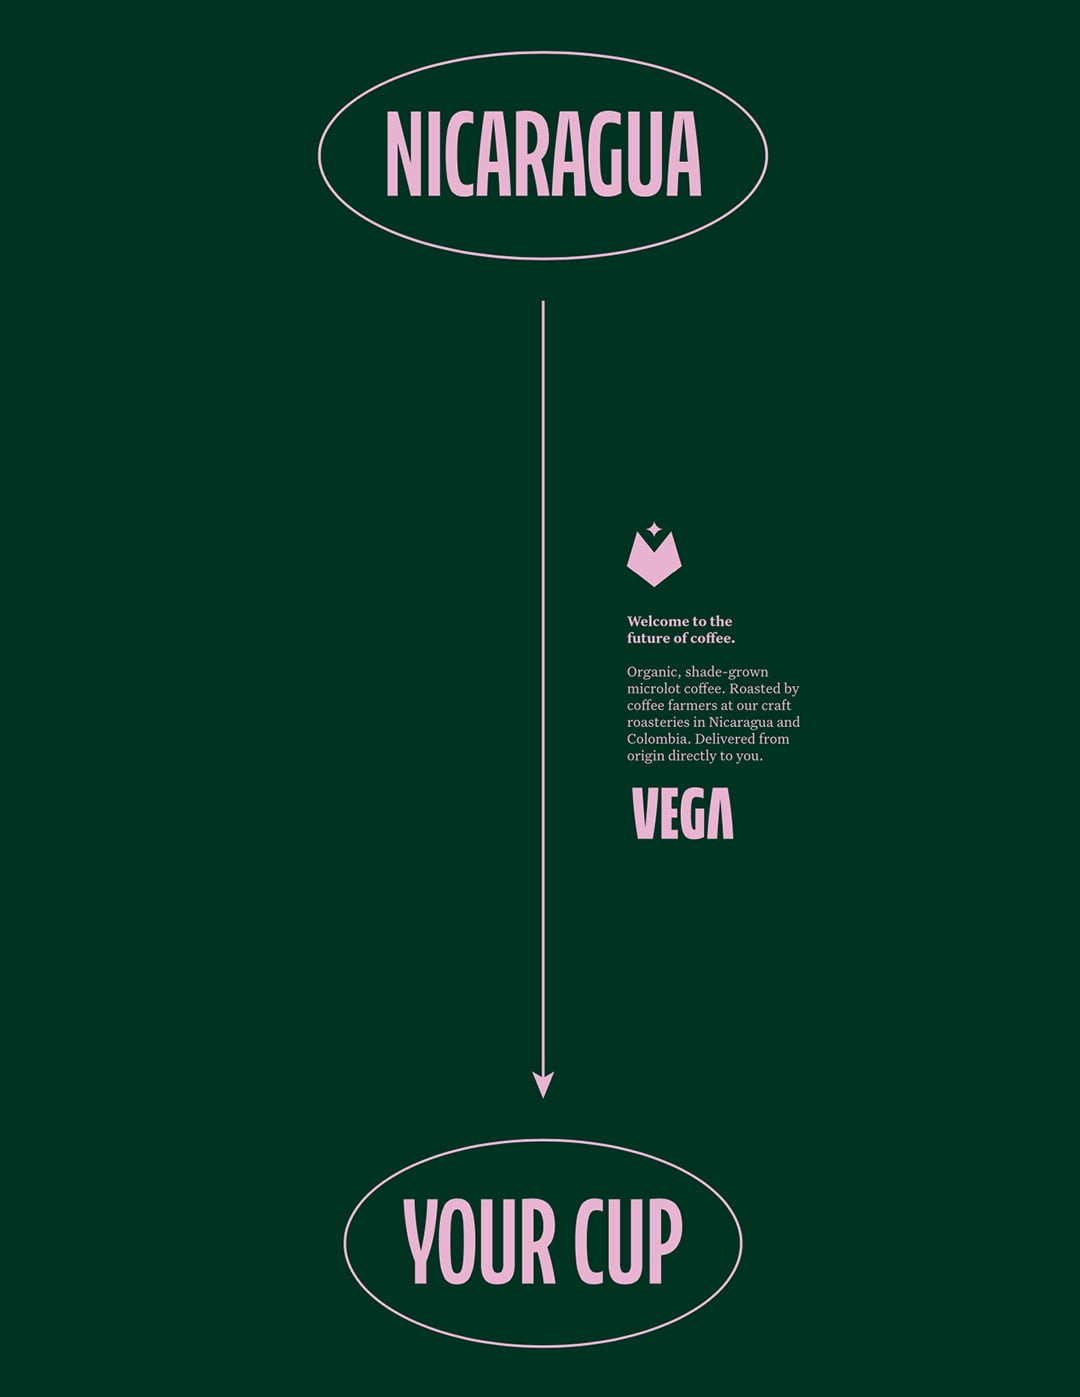 Vega Coffee graphic showing the direct path from Nicaragua to the purchaser's coffee cup